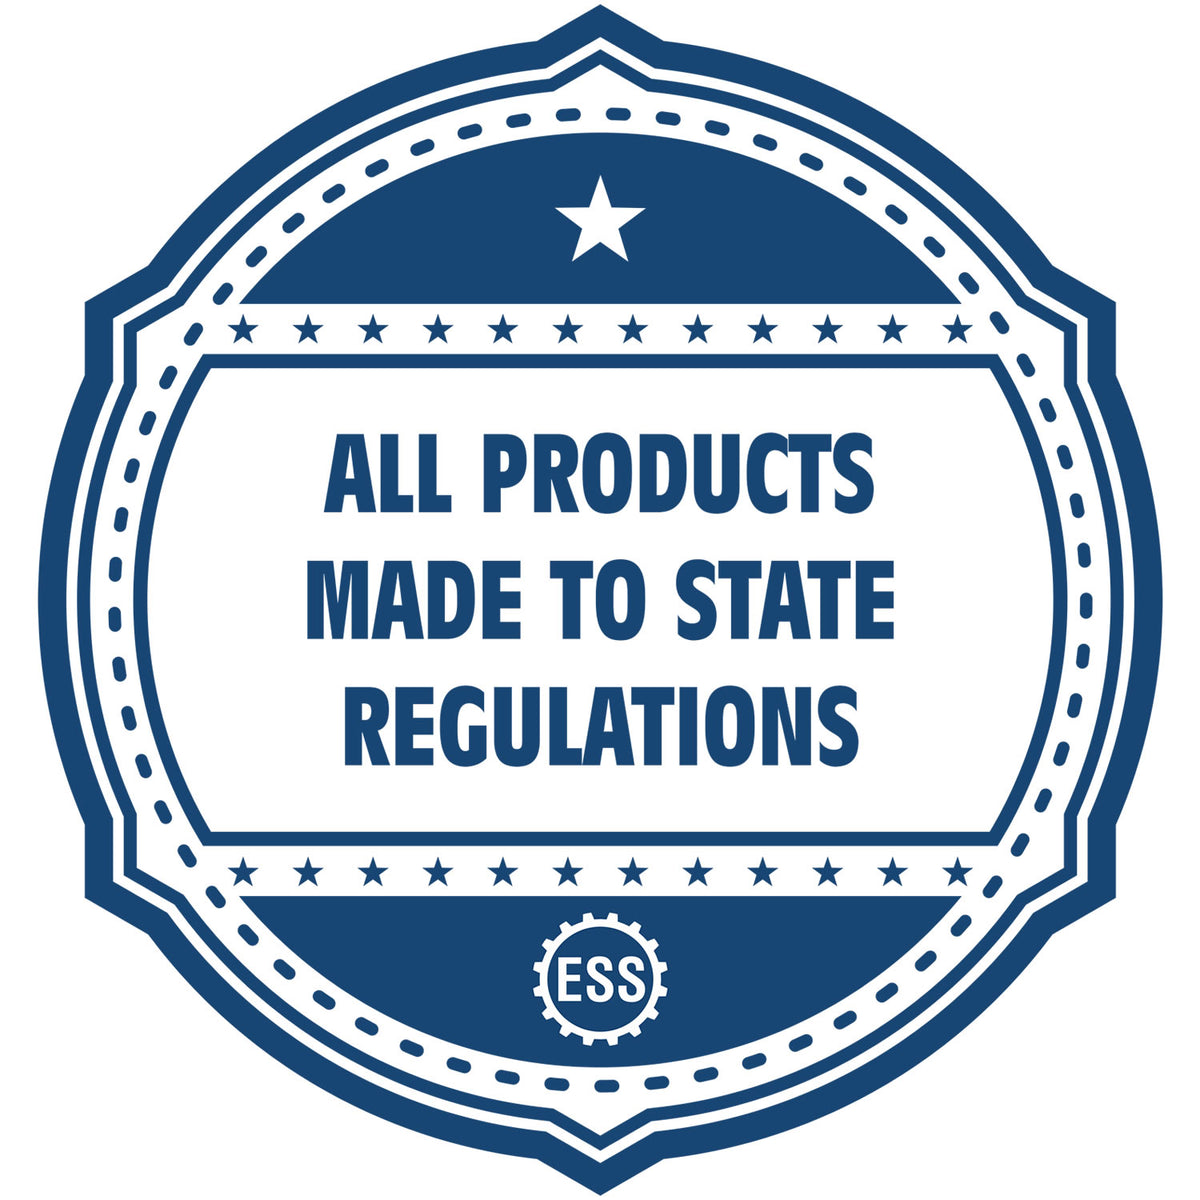 An icon or badge element for the Long Reach Kansas PE Seal showing that this product is made in compliance with state regulations.